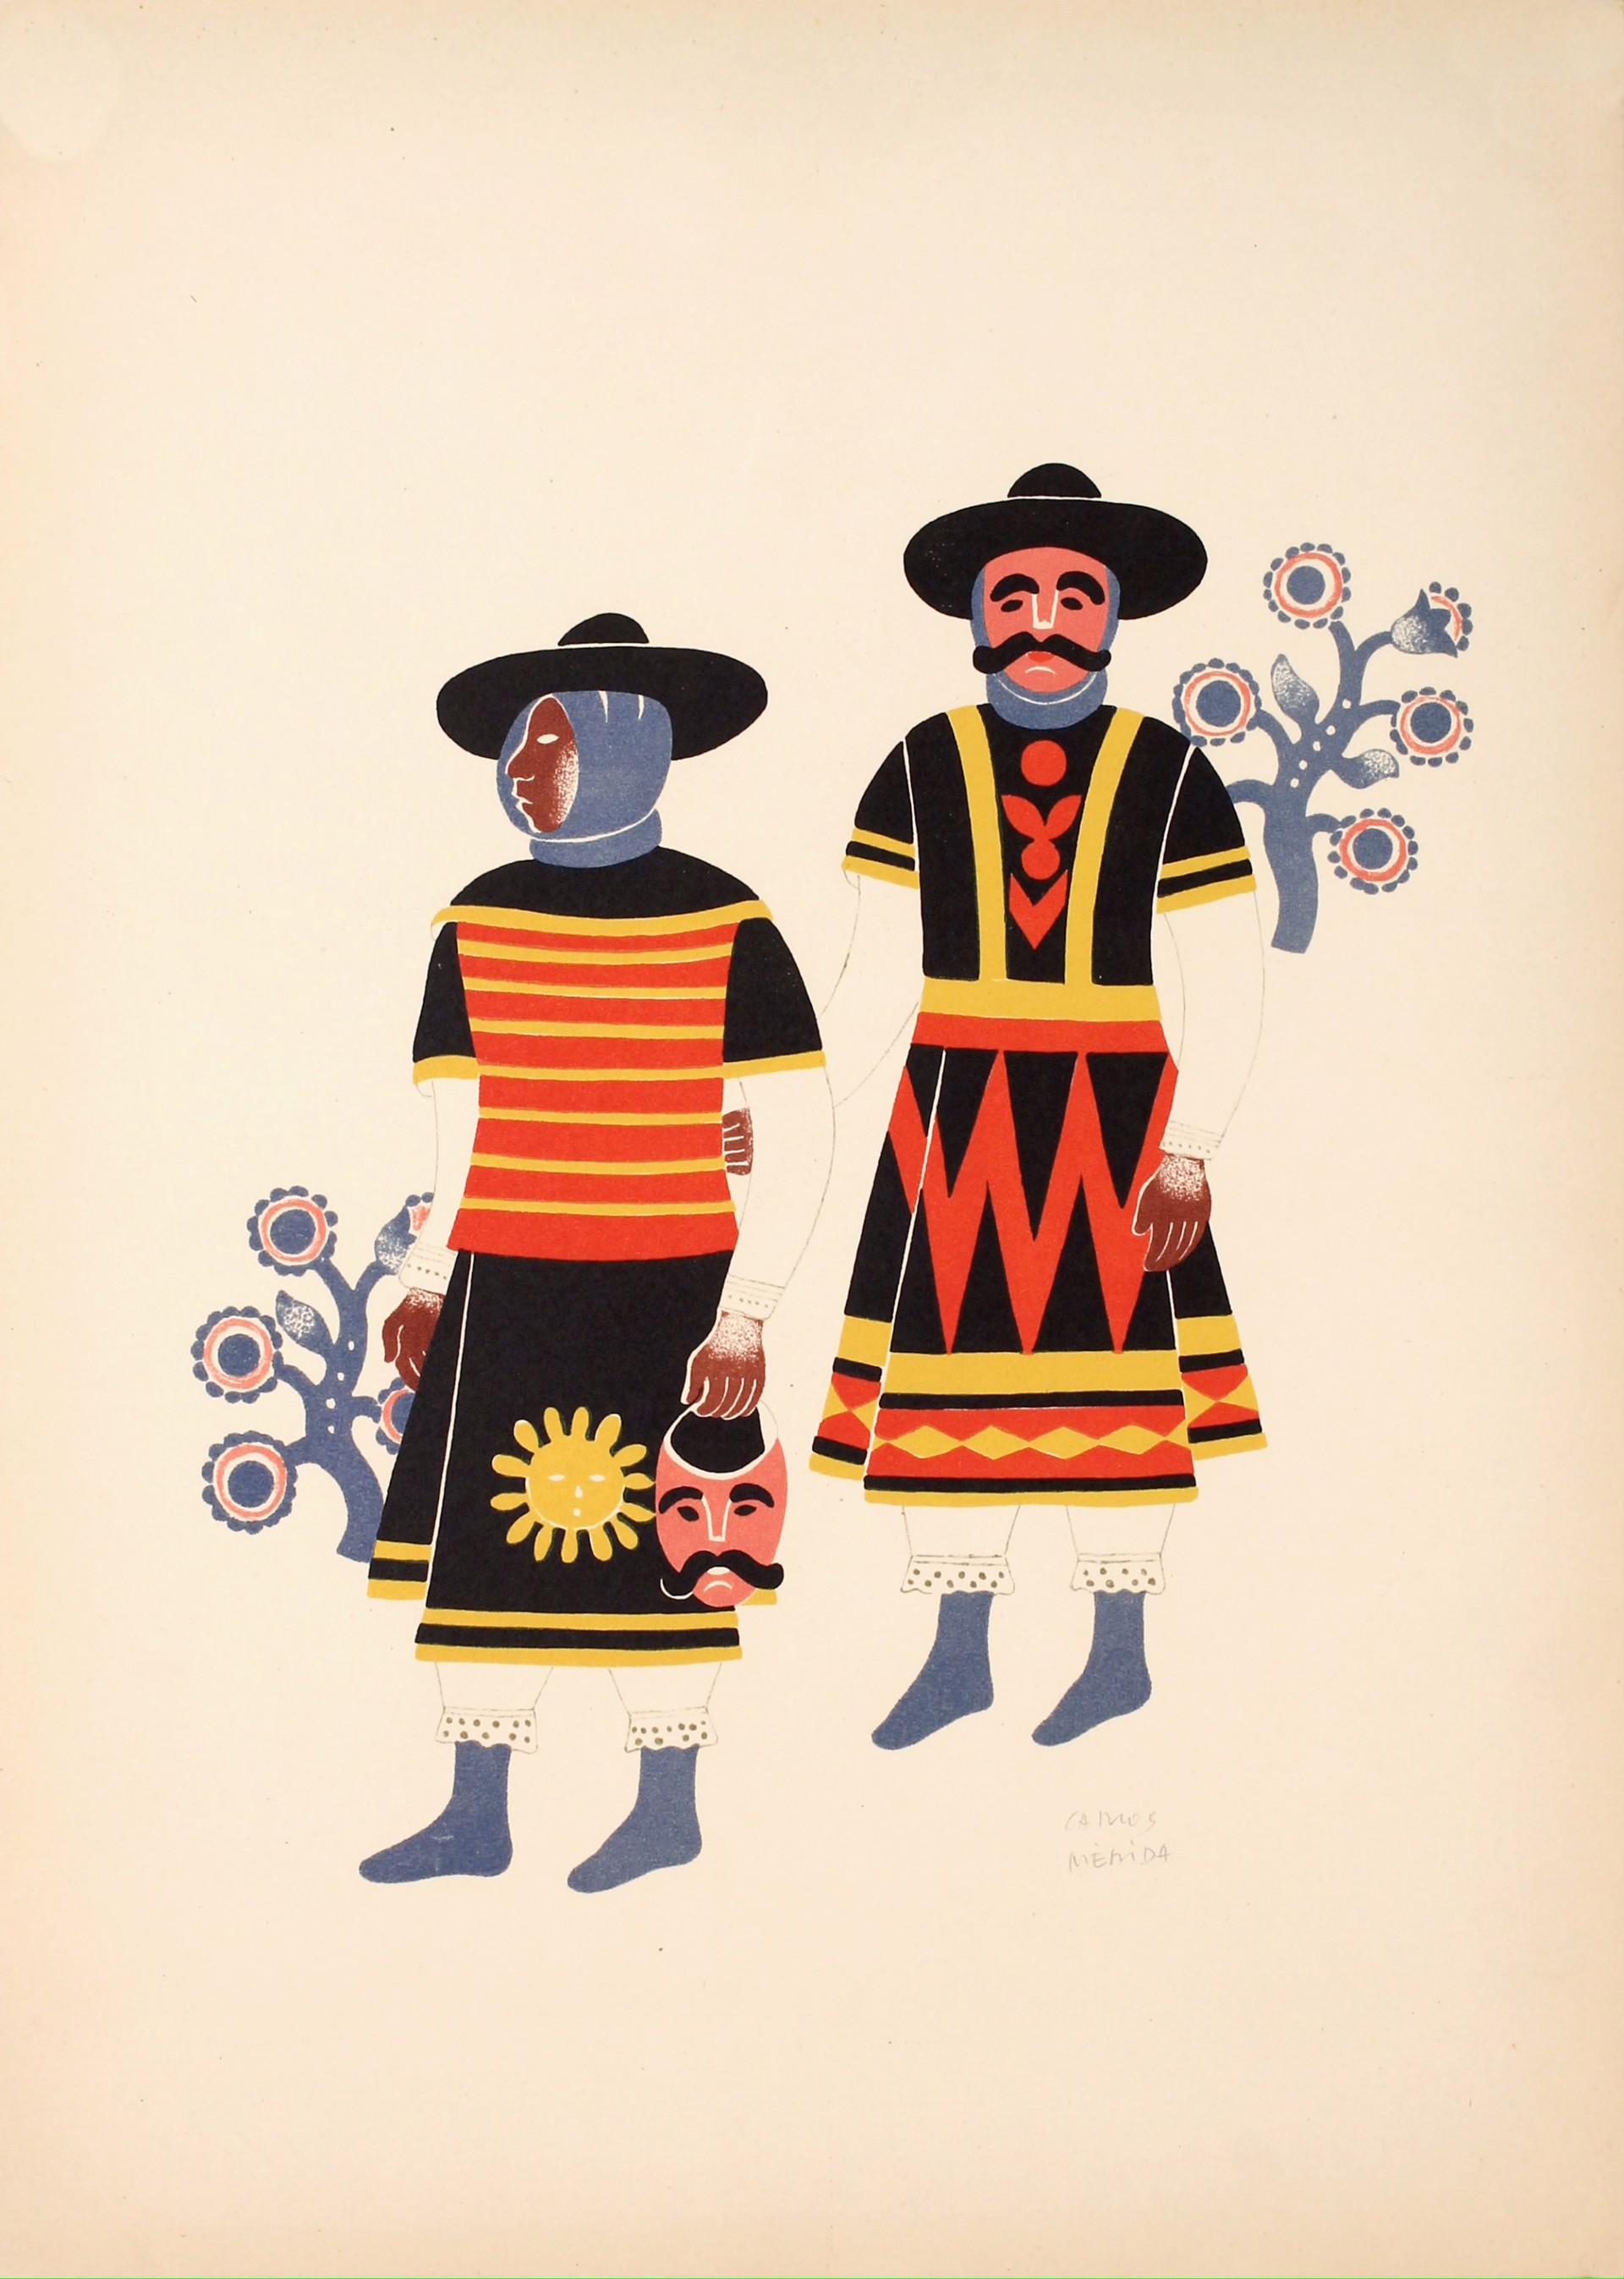 Two Men From Huixquilucan at the Fiesta of the Huehuenches by Carlos Mérida (1891 - 1985)